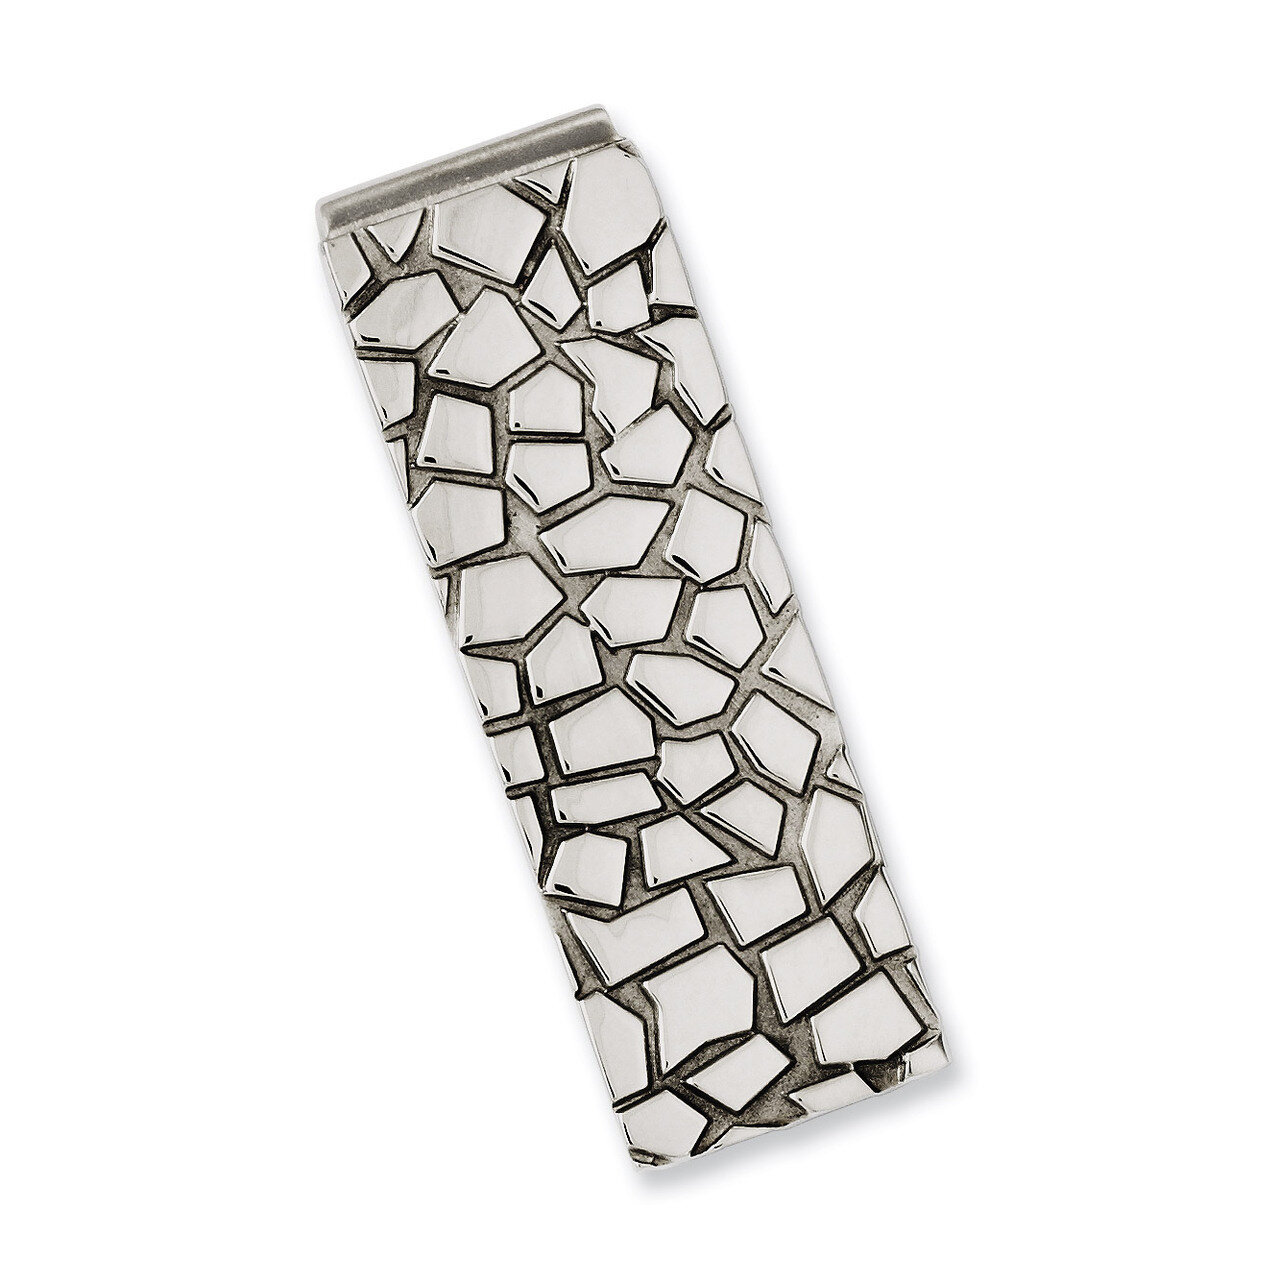 Textured & Polished Money Clip - Stainless Steel SRM151